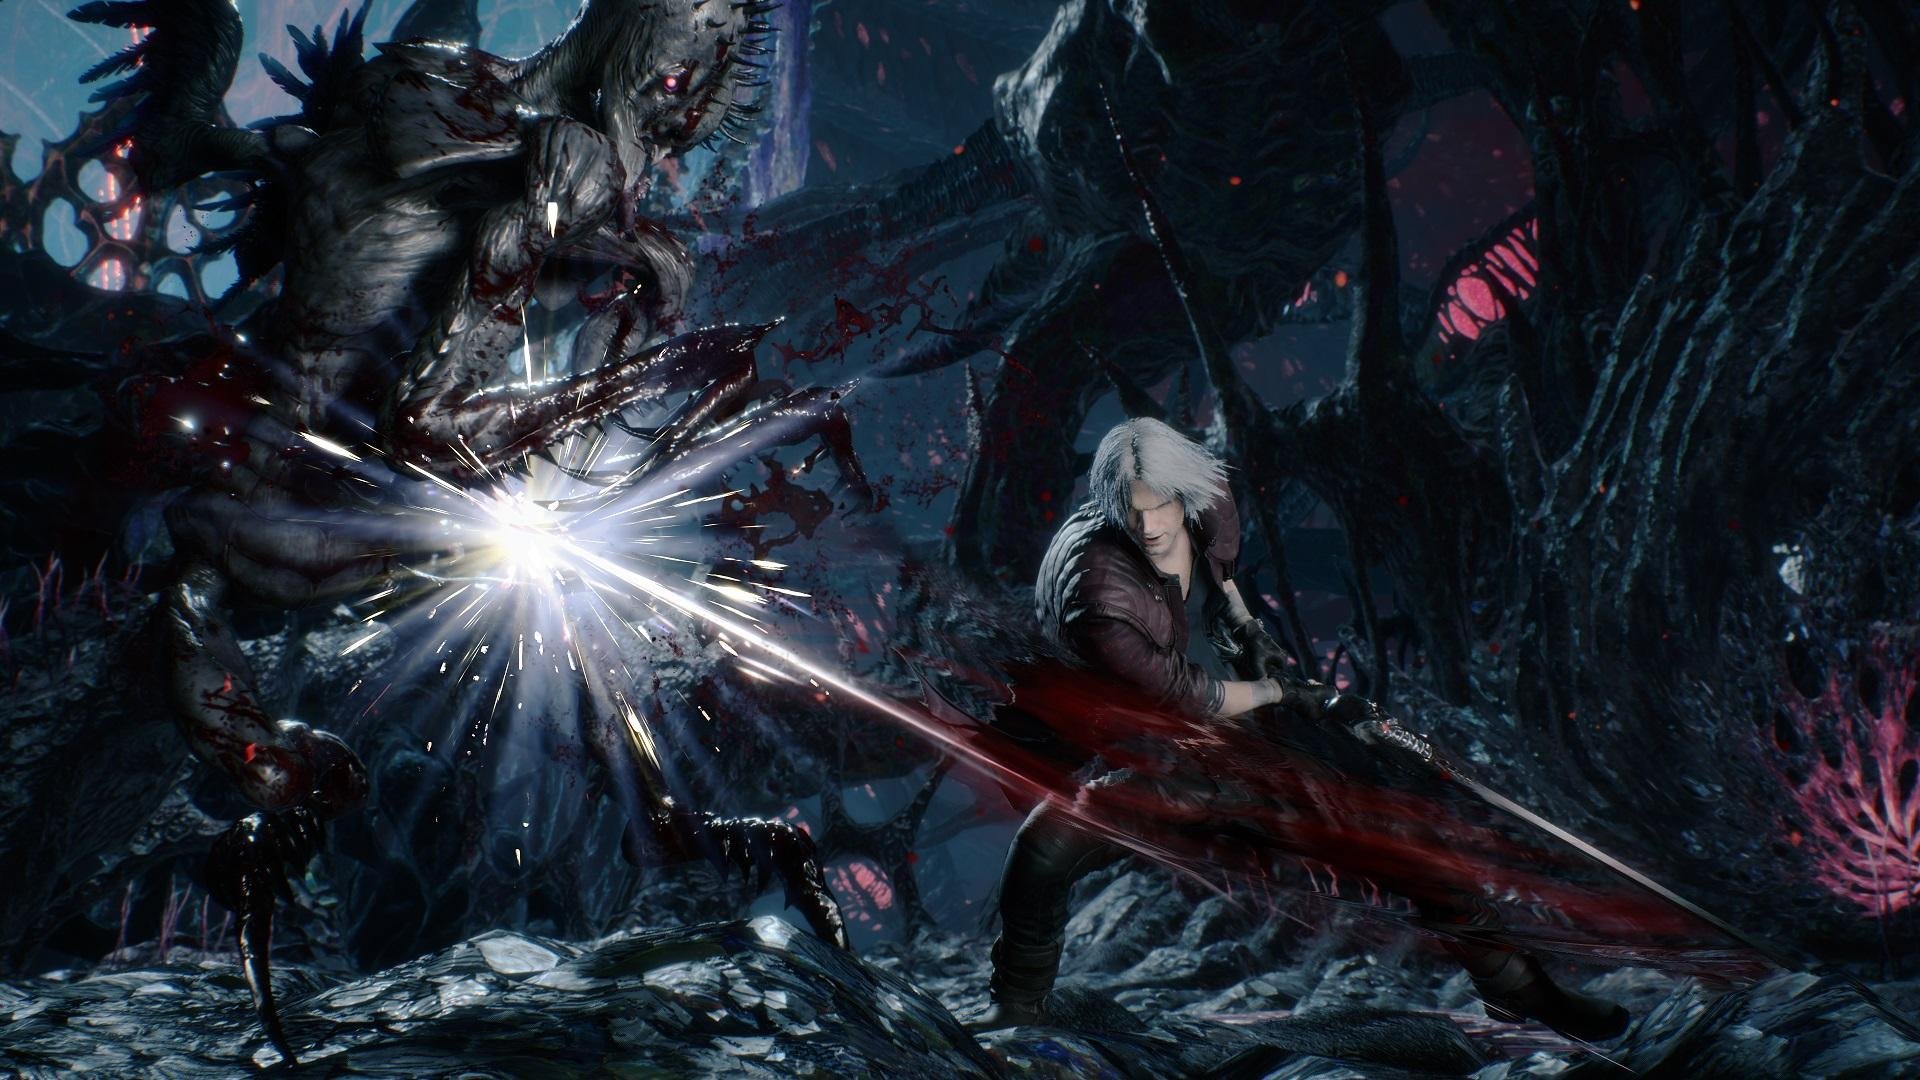 devil may cry enemy files